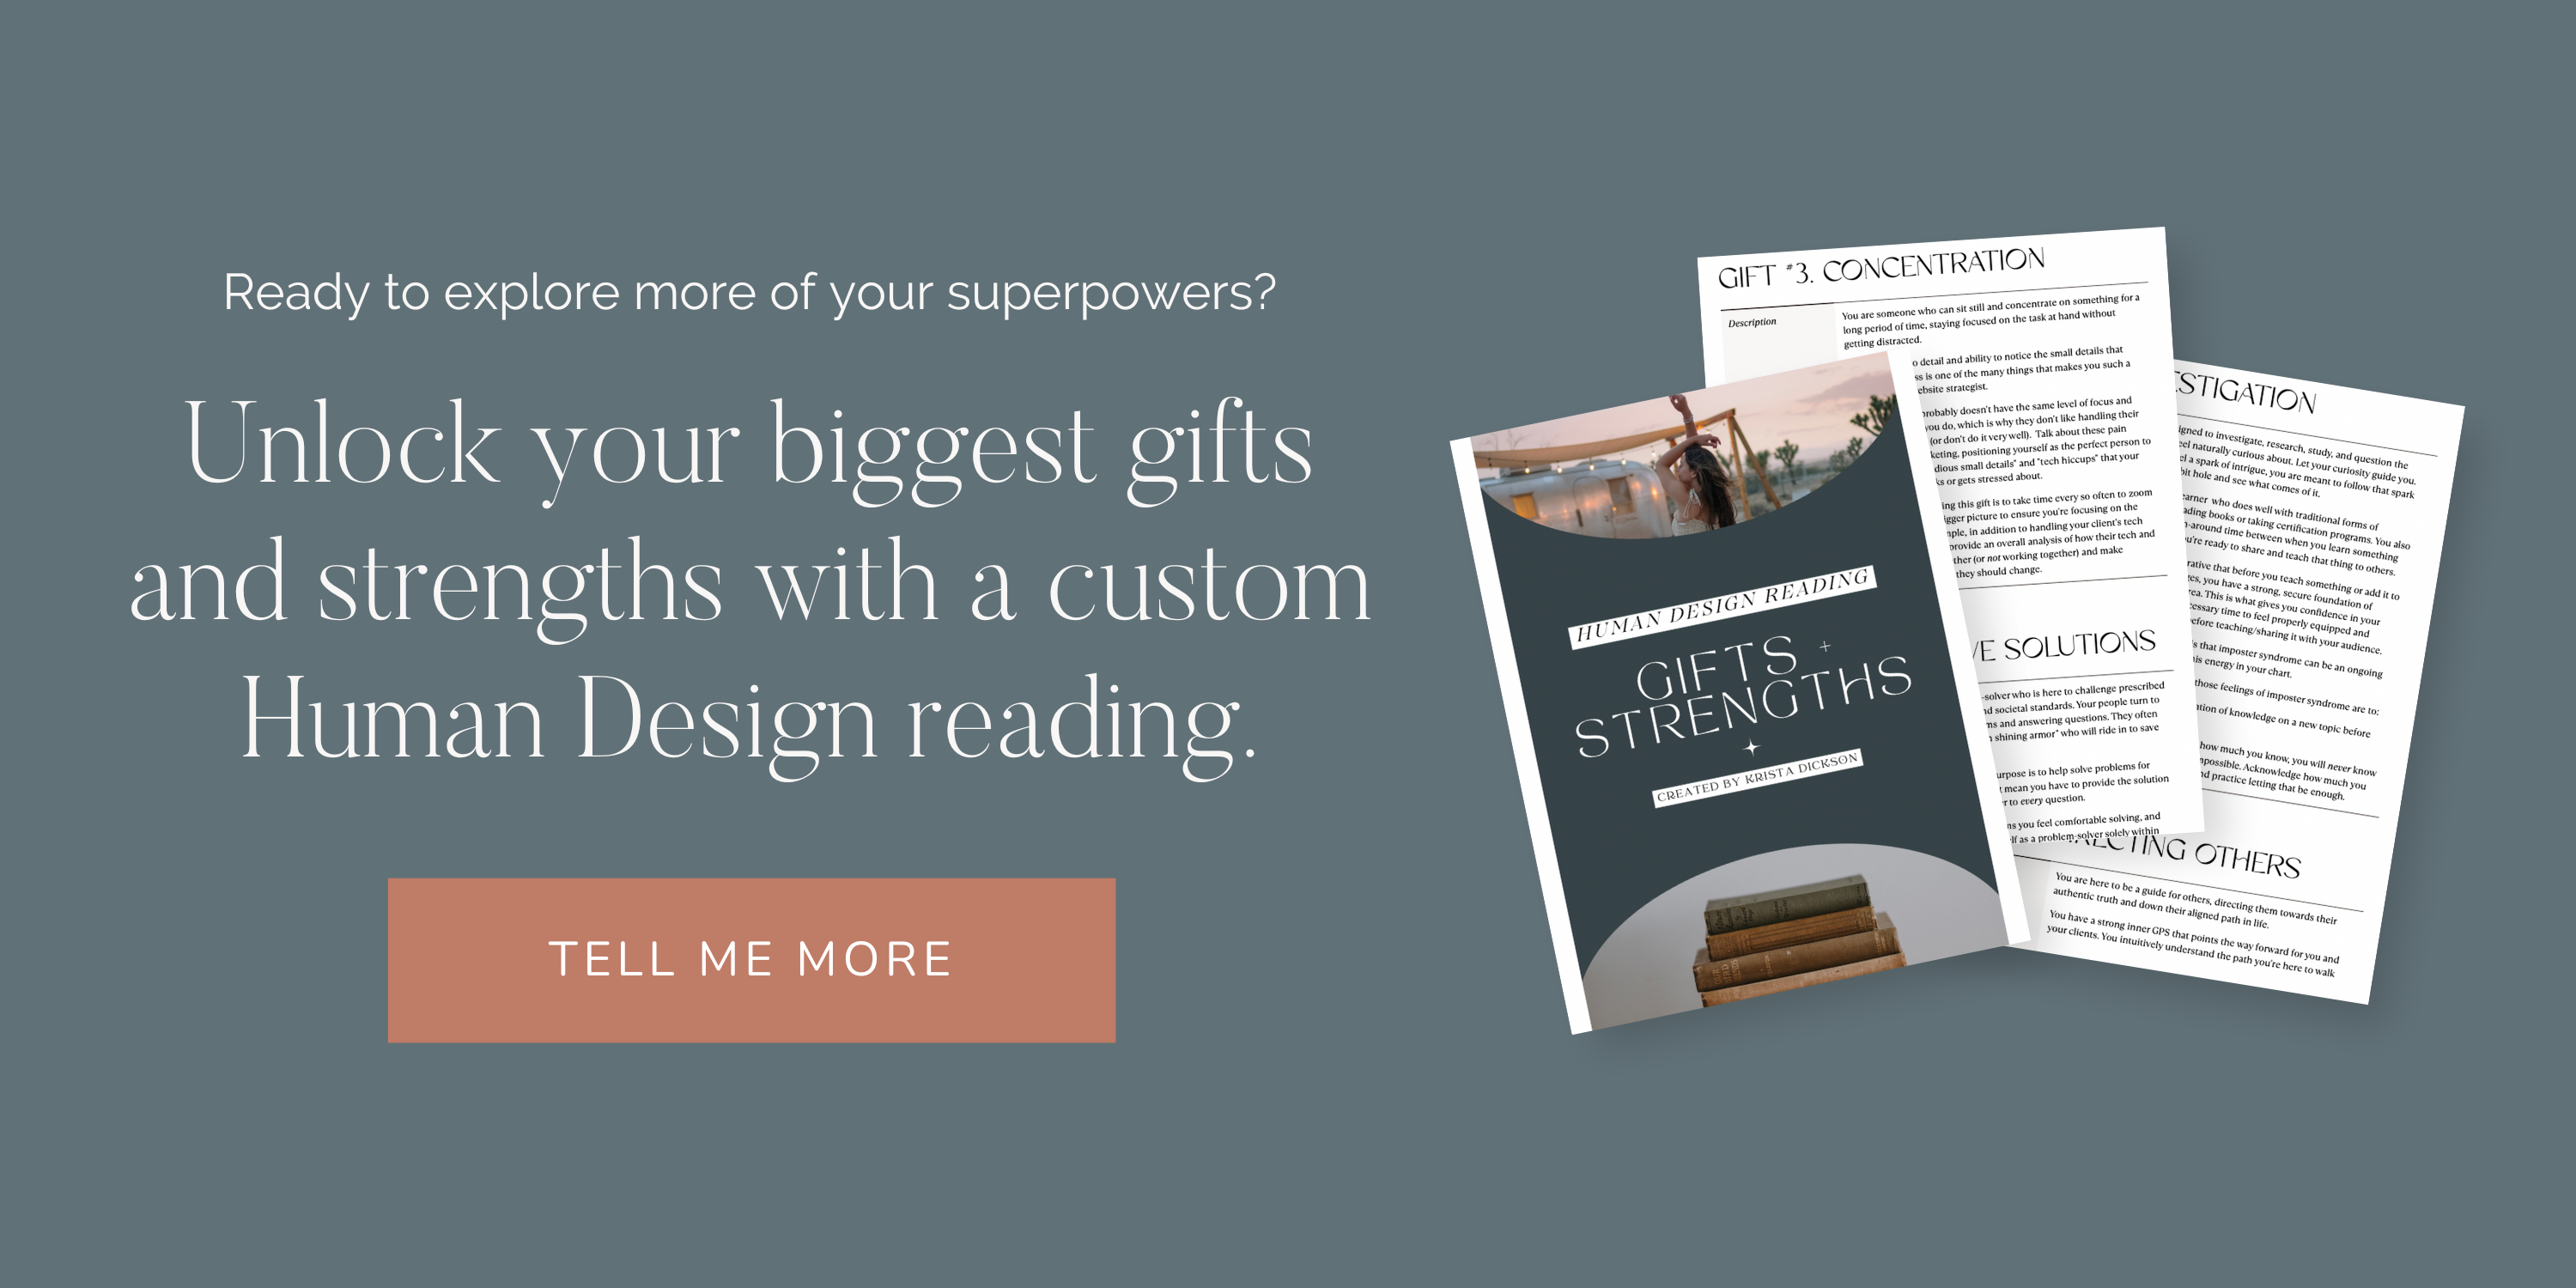 Unlock your biggest gifts and strengths with a custom Human Design Reading.